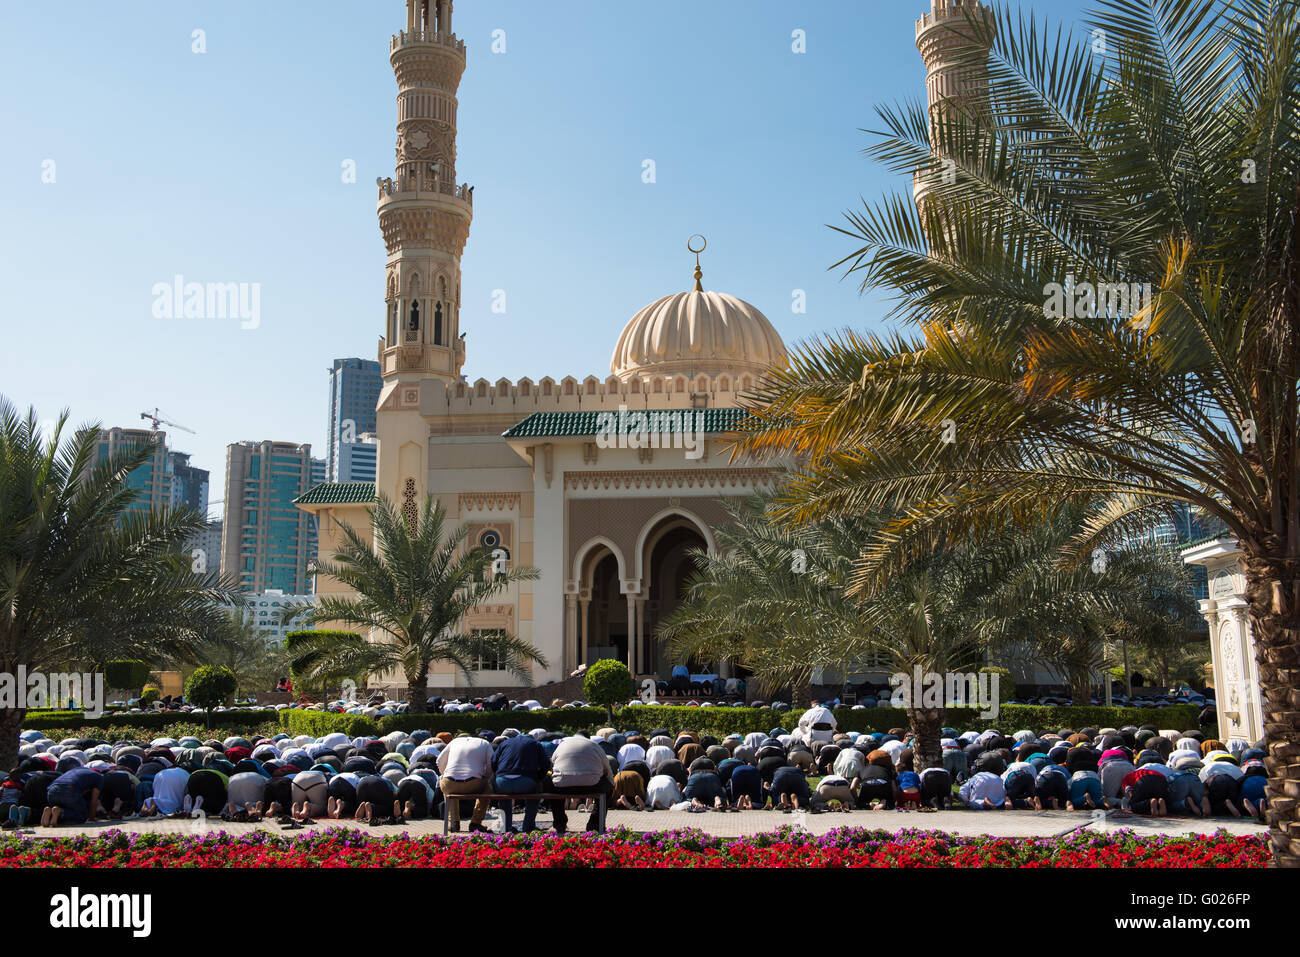 People worshiping outside a mosque, Emirate of Sharjah, UAE. Stock Photo